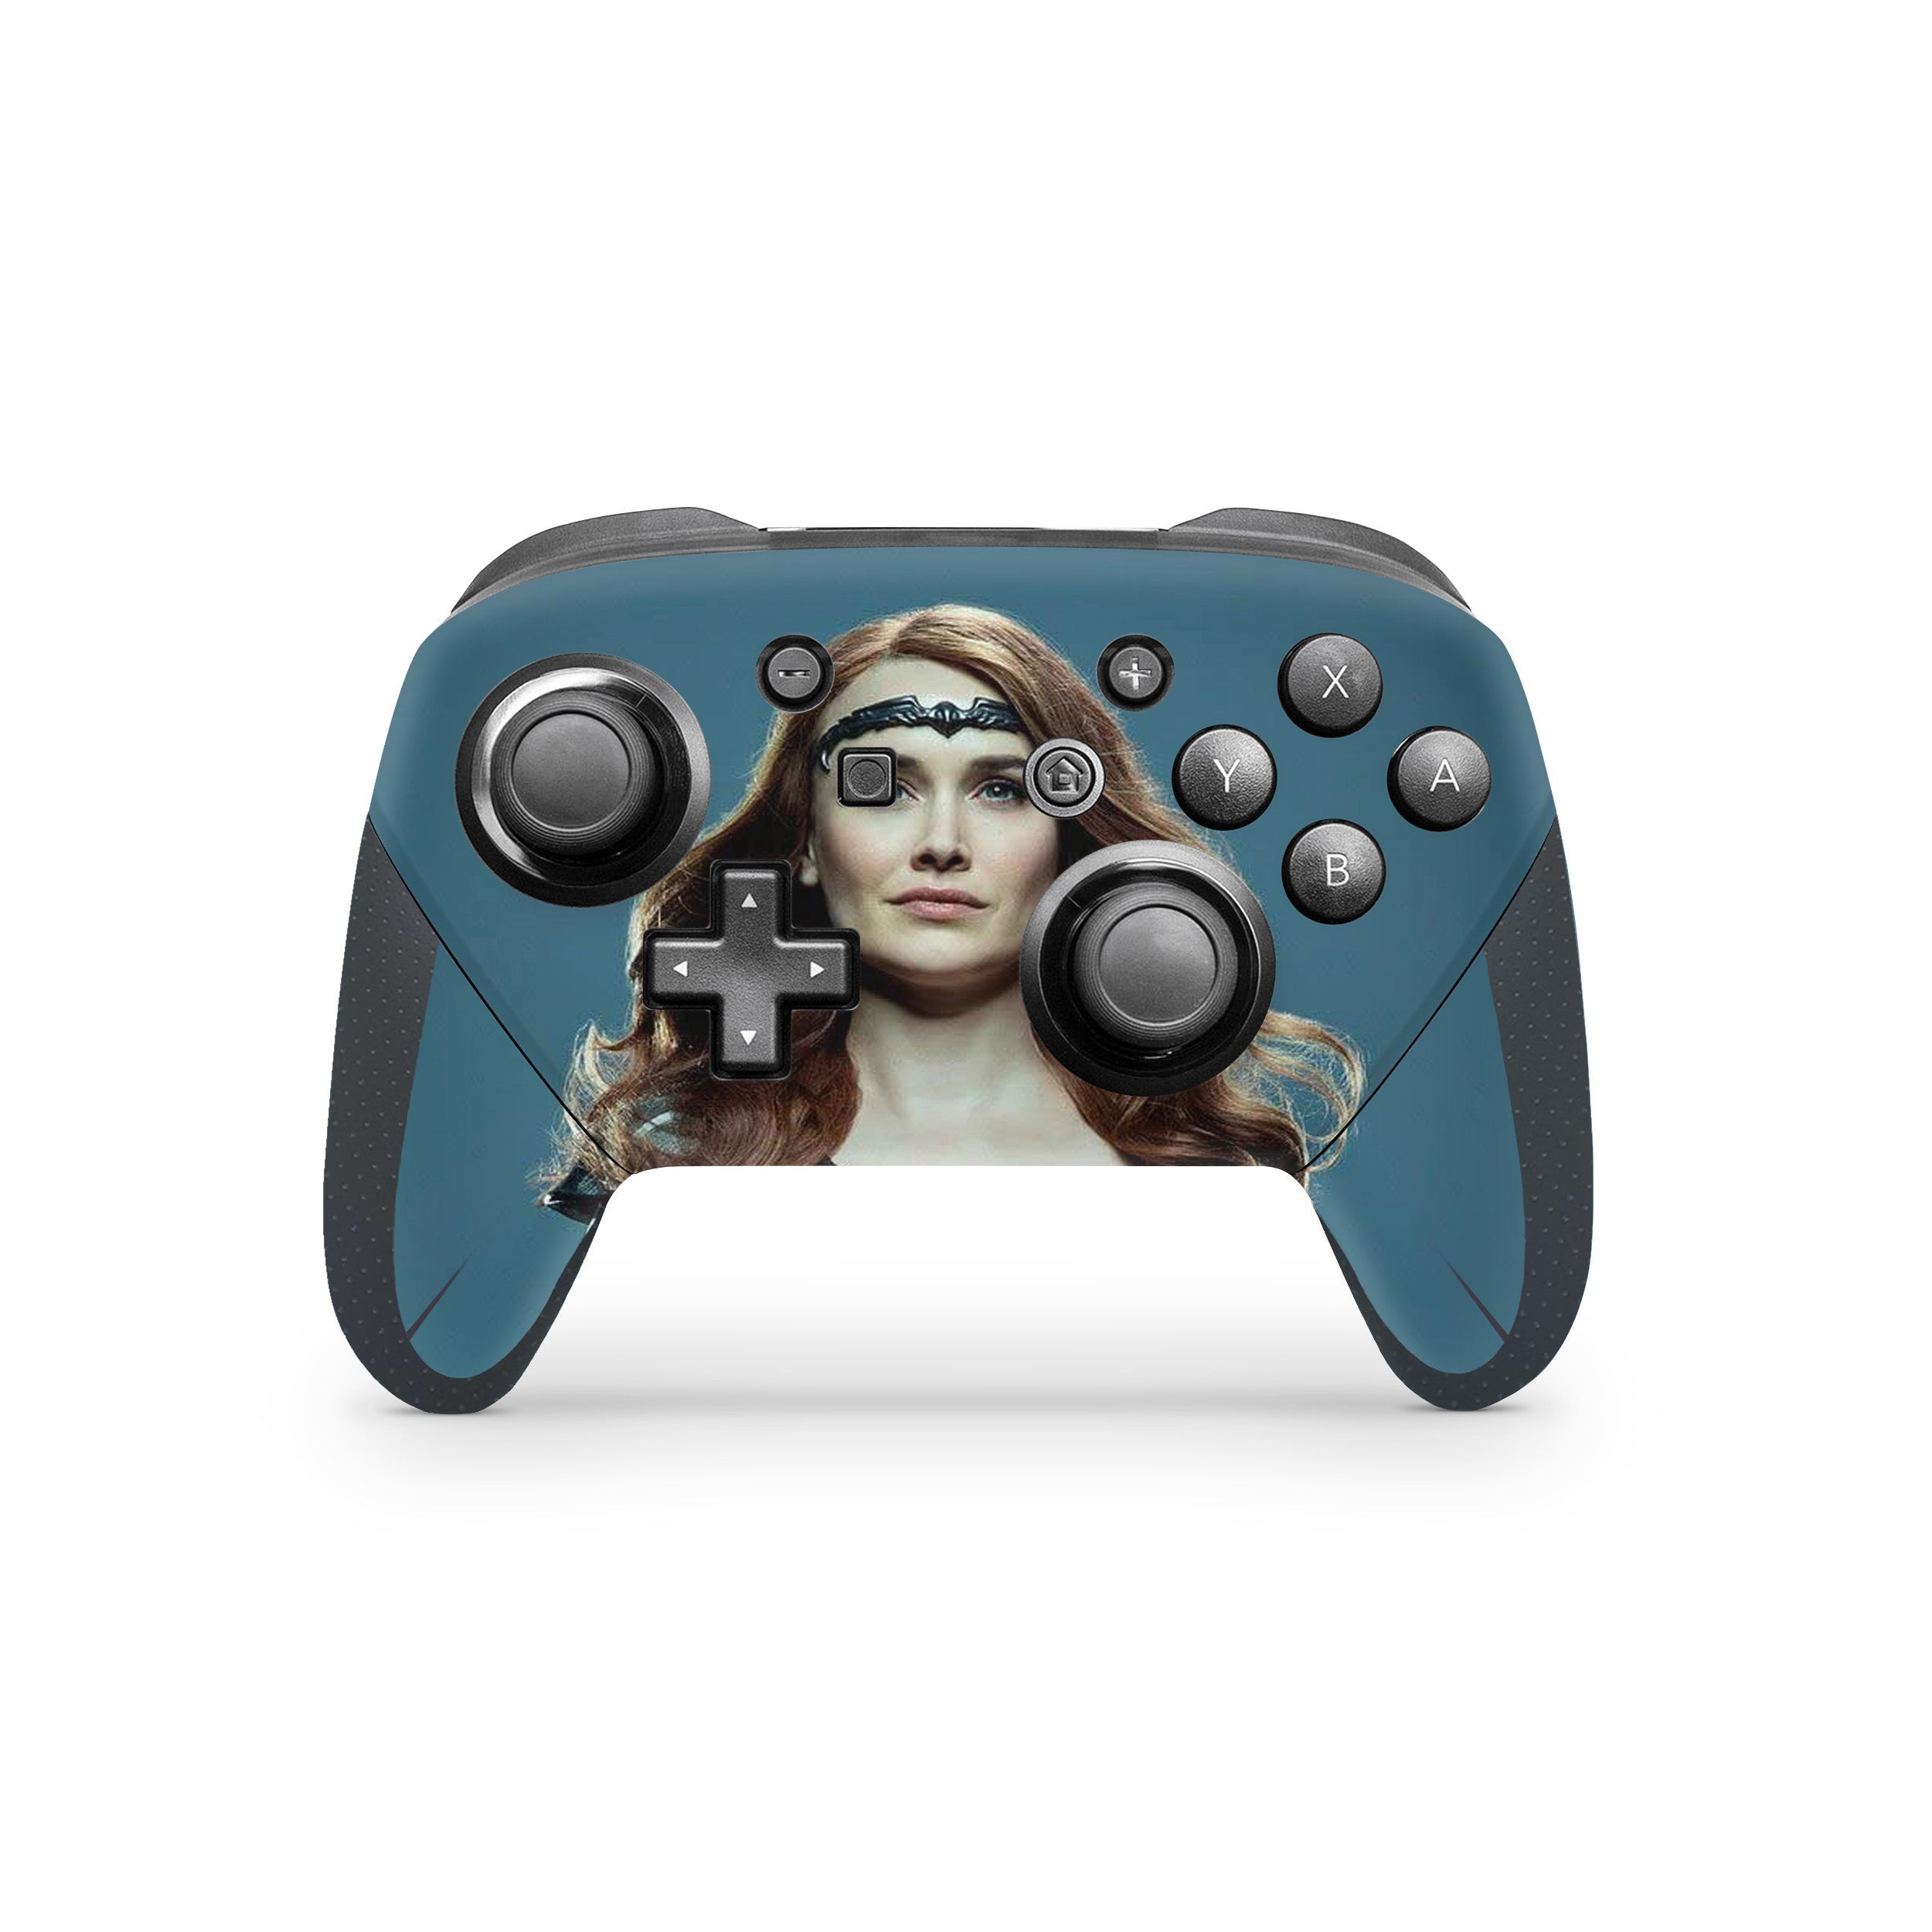 A video game skin featuring a The Boys Queen Meave design for the Switch Pro Controller.